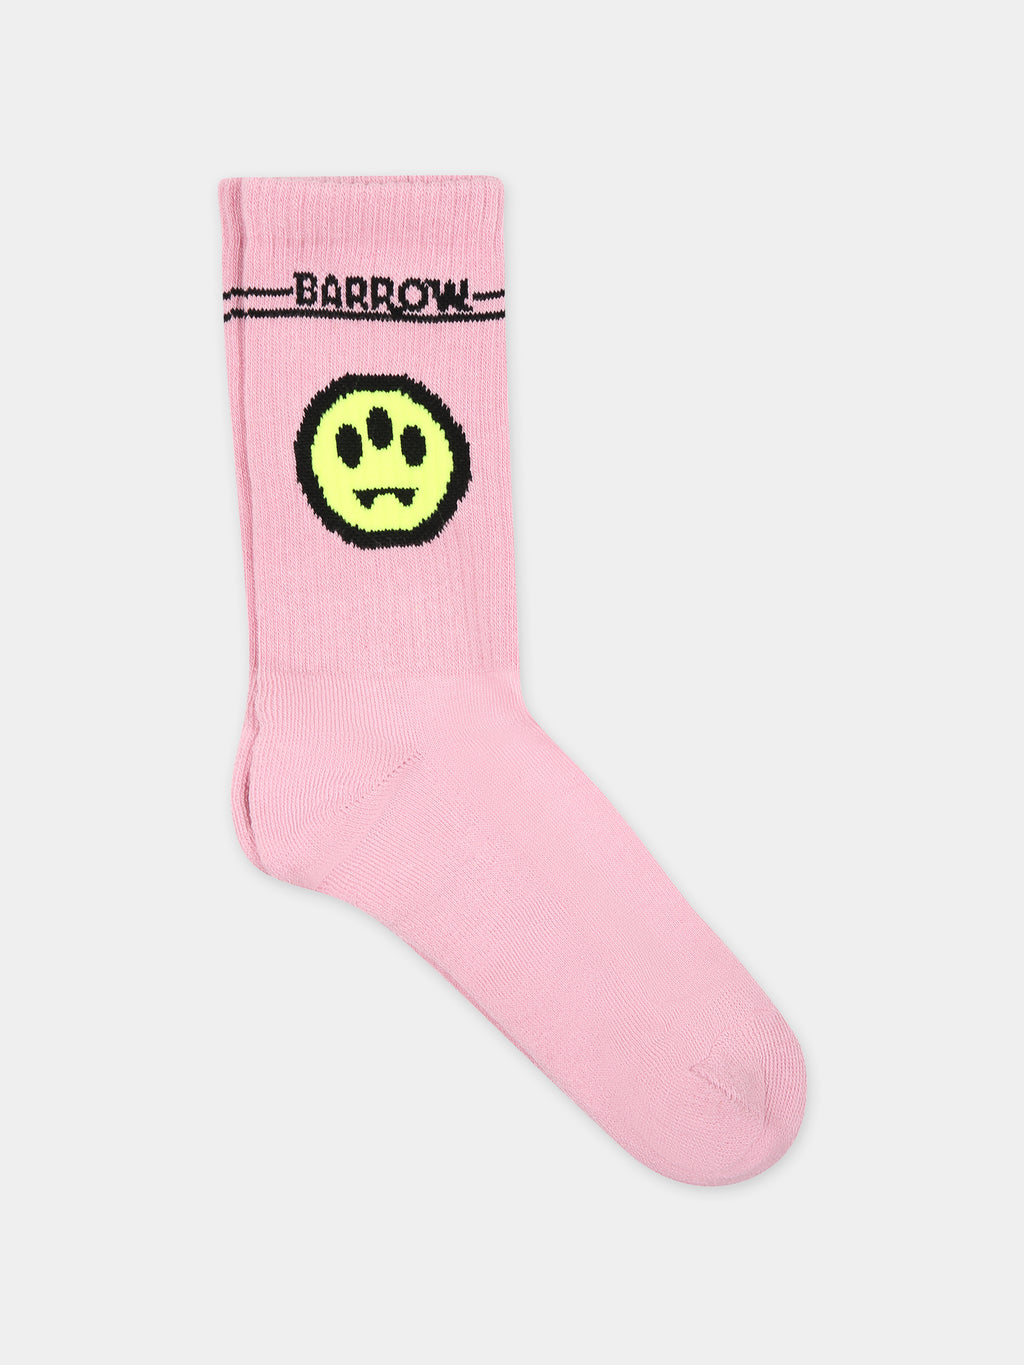 Pink socks for girl with smiley